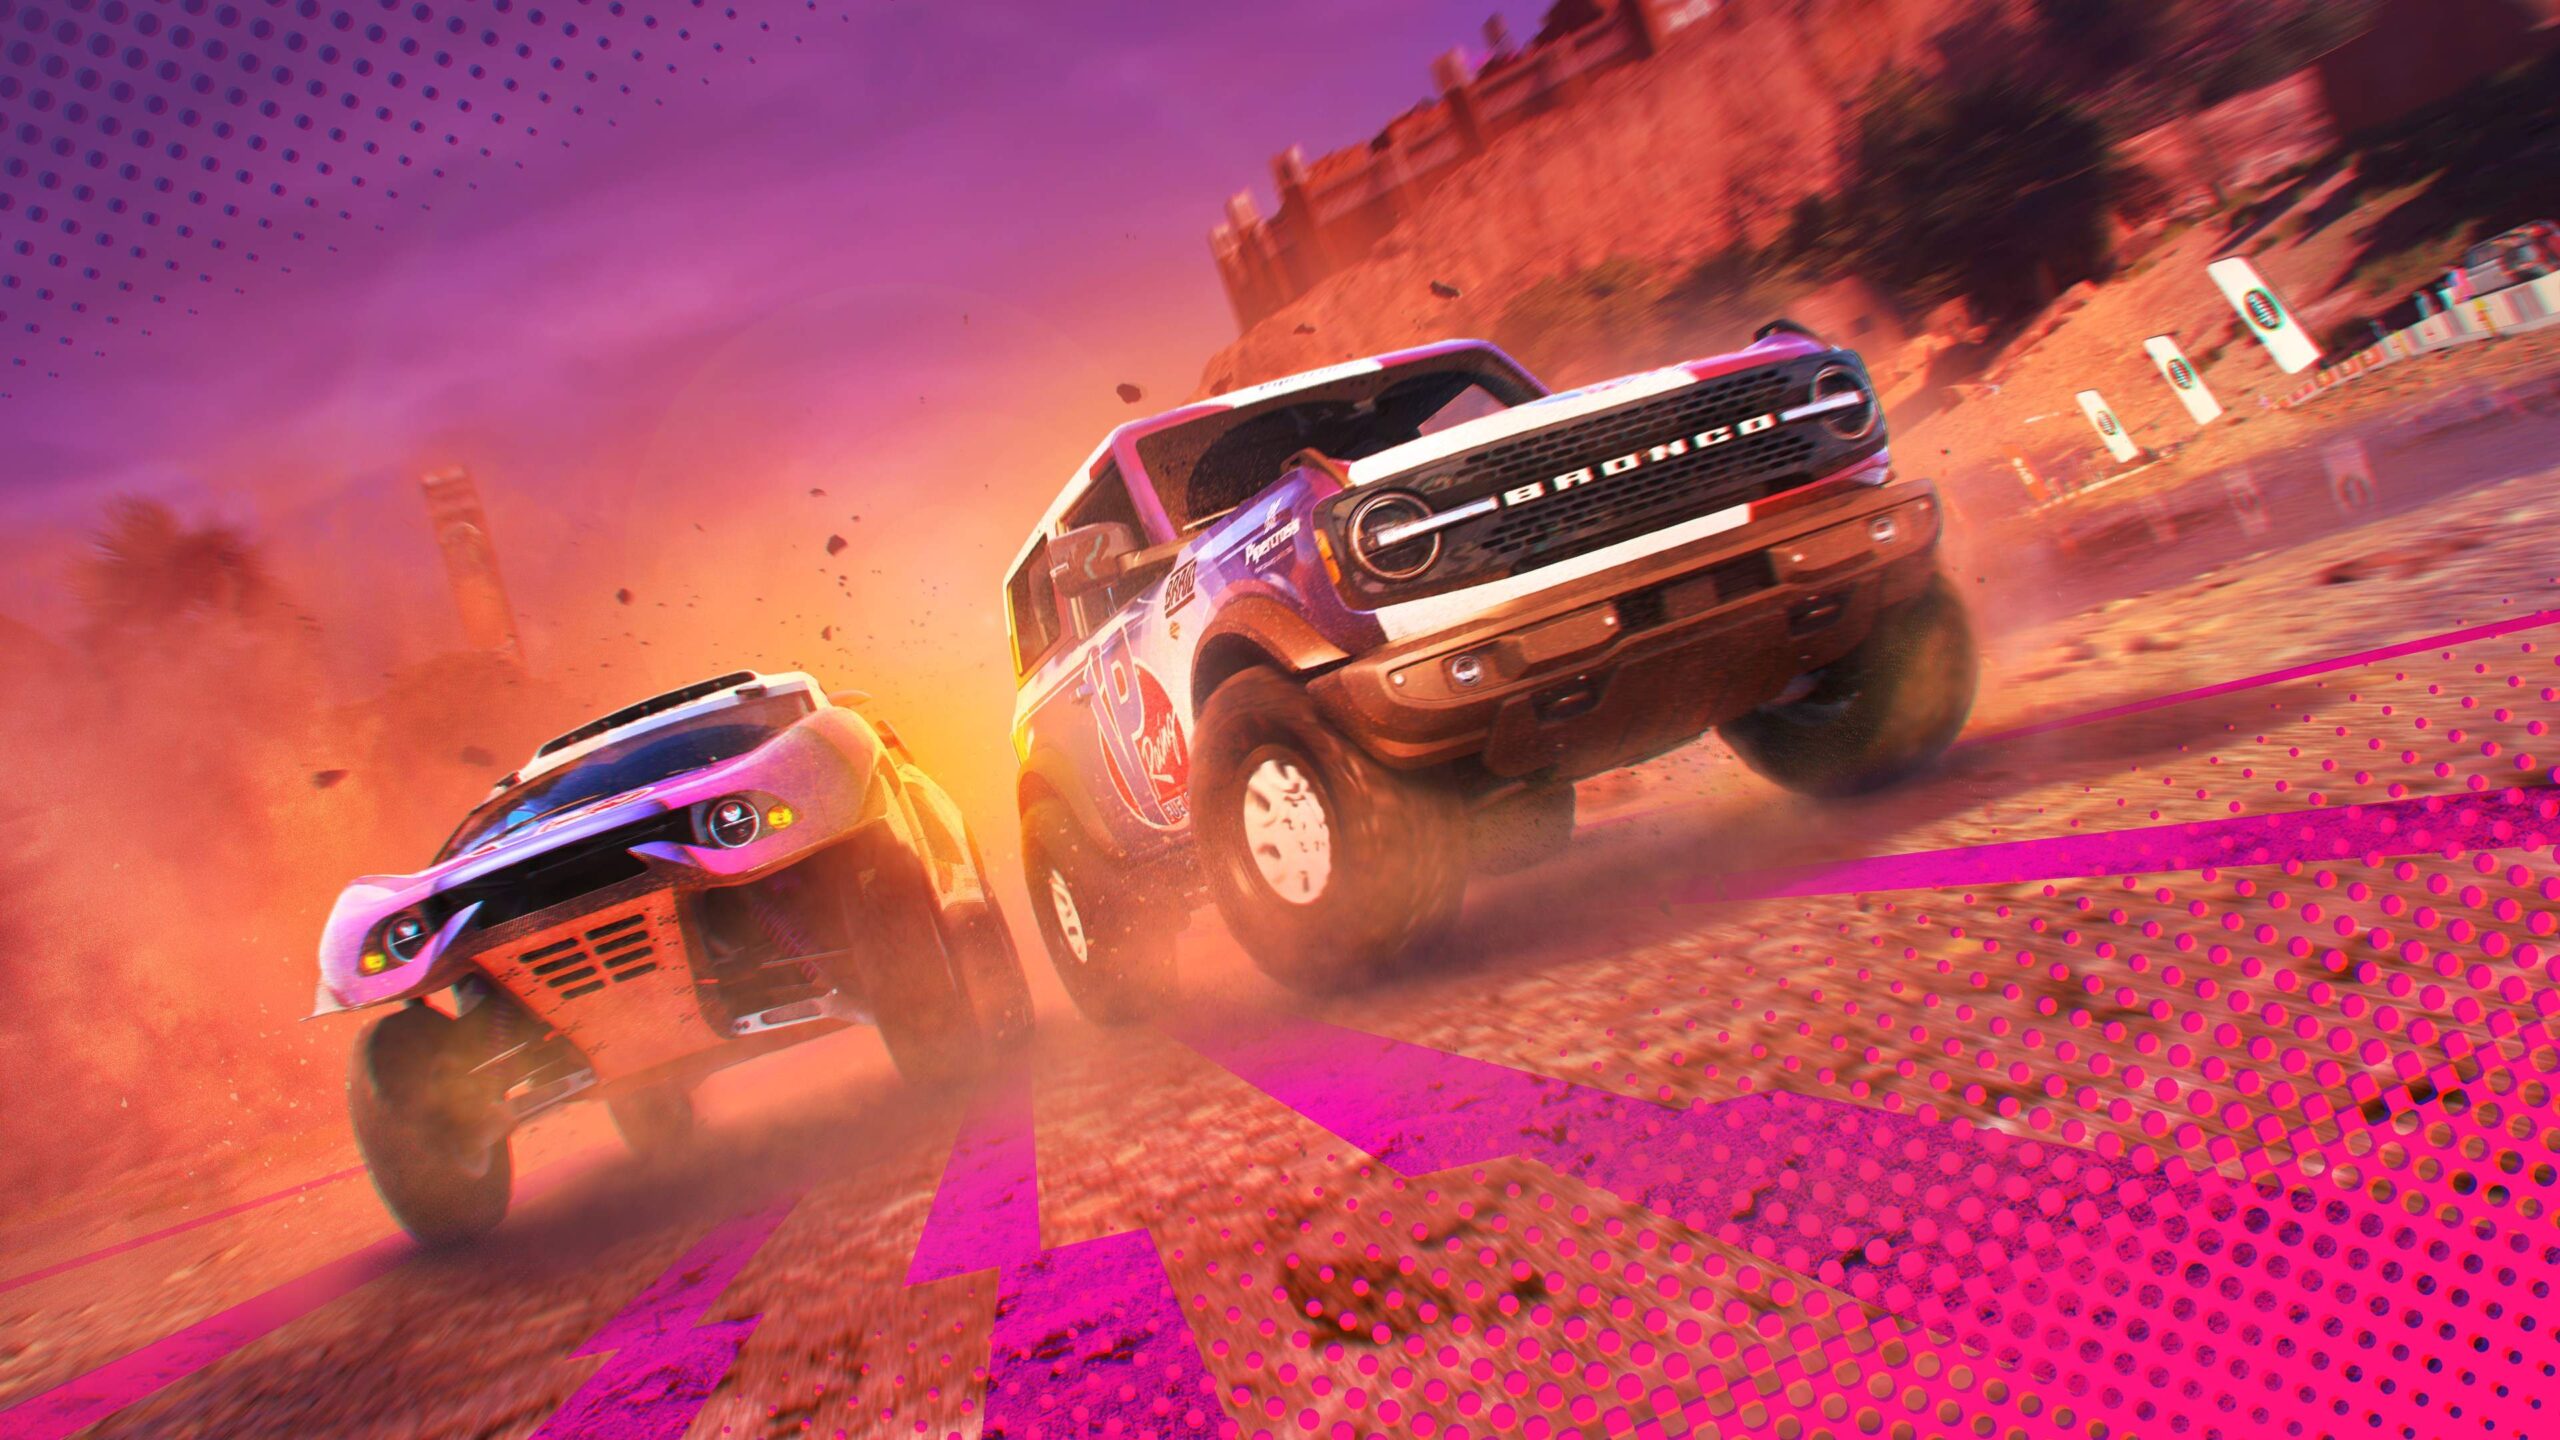 Video For Dirt 5 Drops the New Ford Bronco into the Off-Road Action in Latest Content Pack